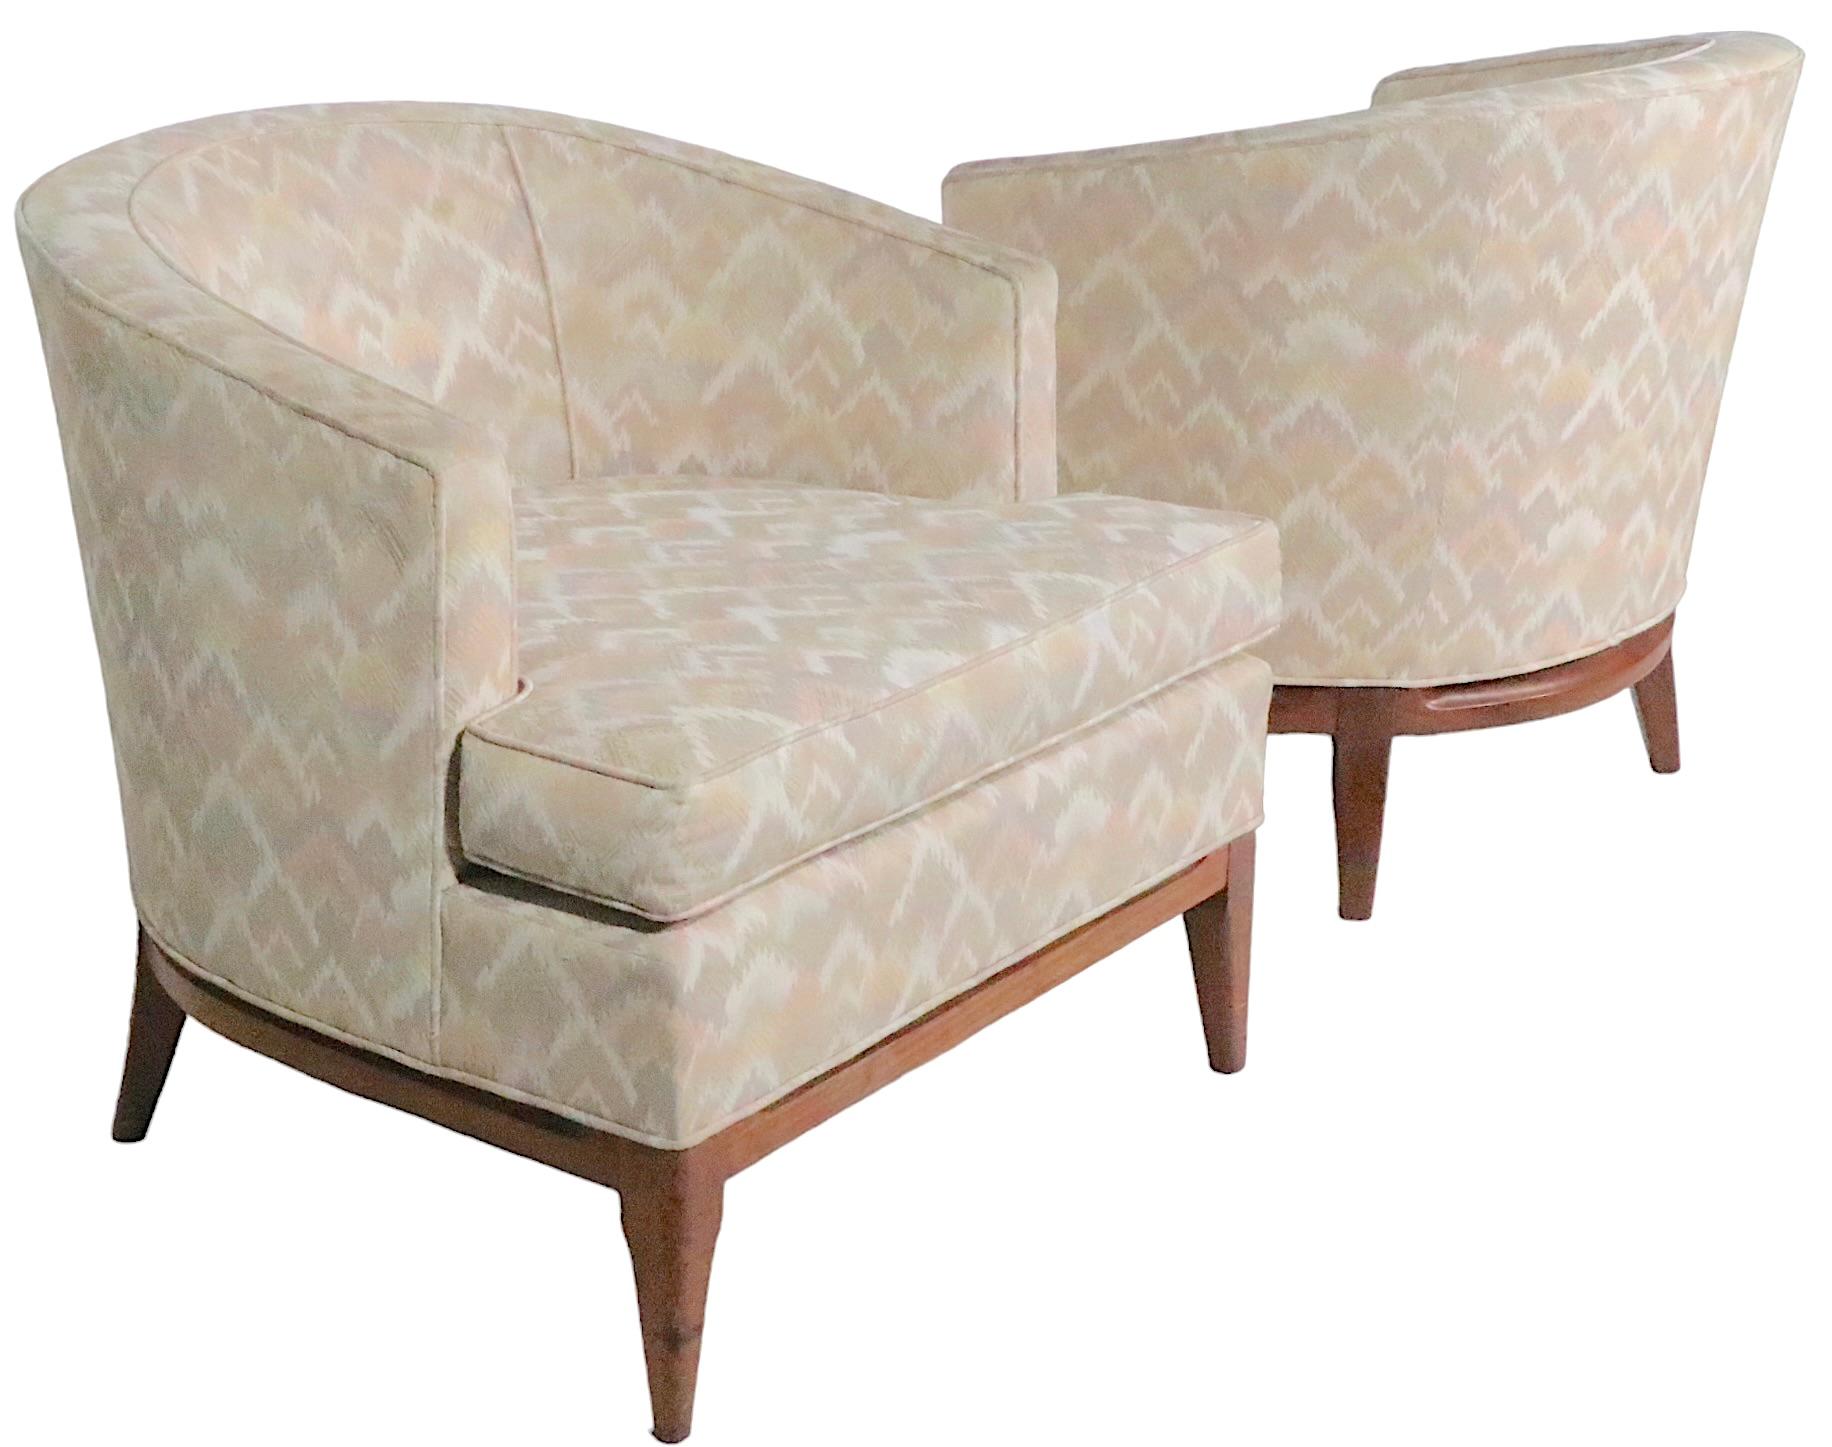 Upholstery Pair. Mid Century Tub Chairs After Robsjohn Gibbings, circa 1950 - 1960s For Sale